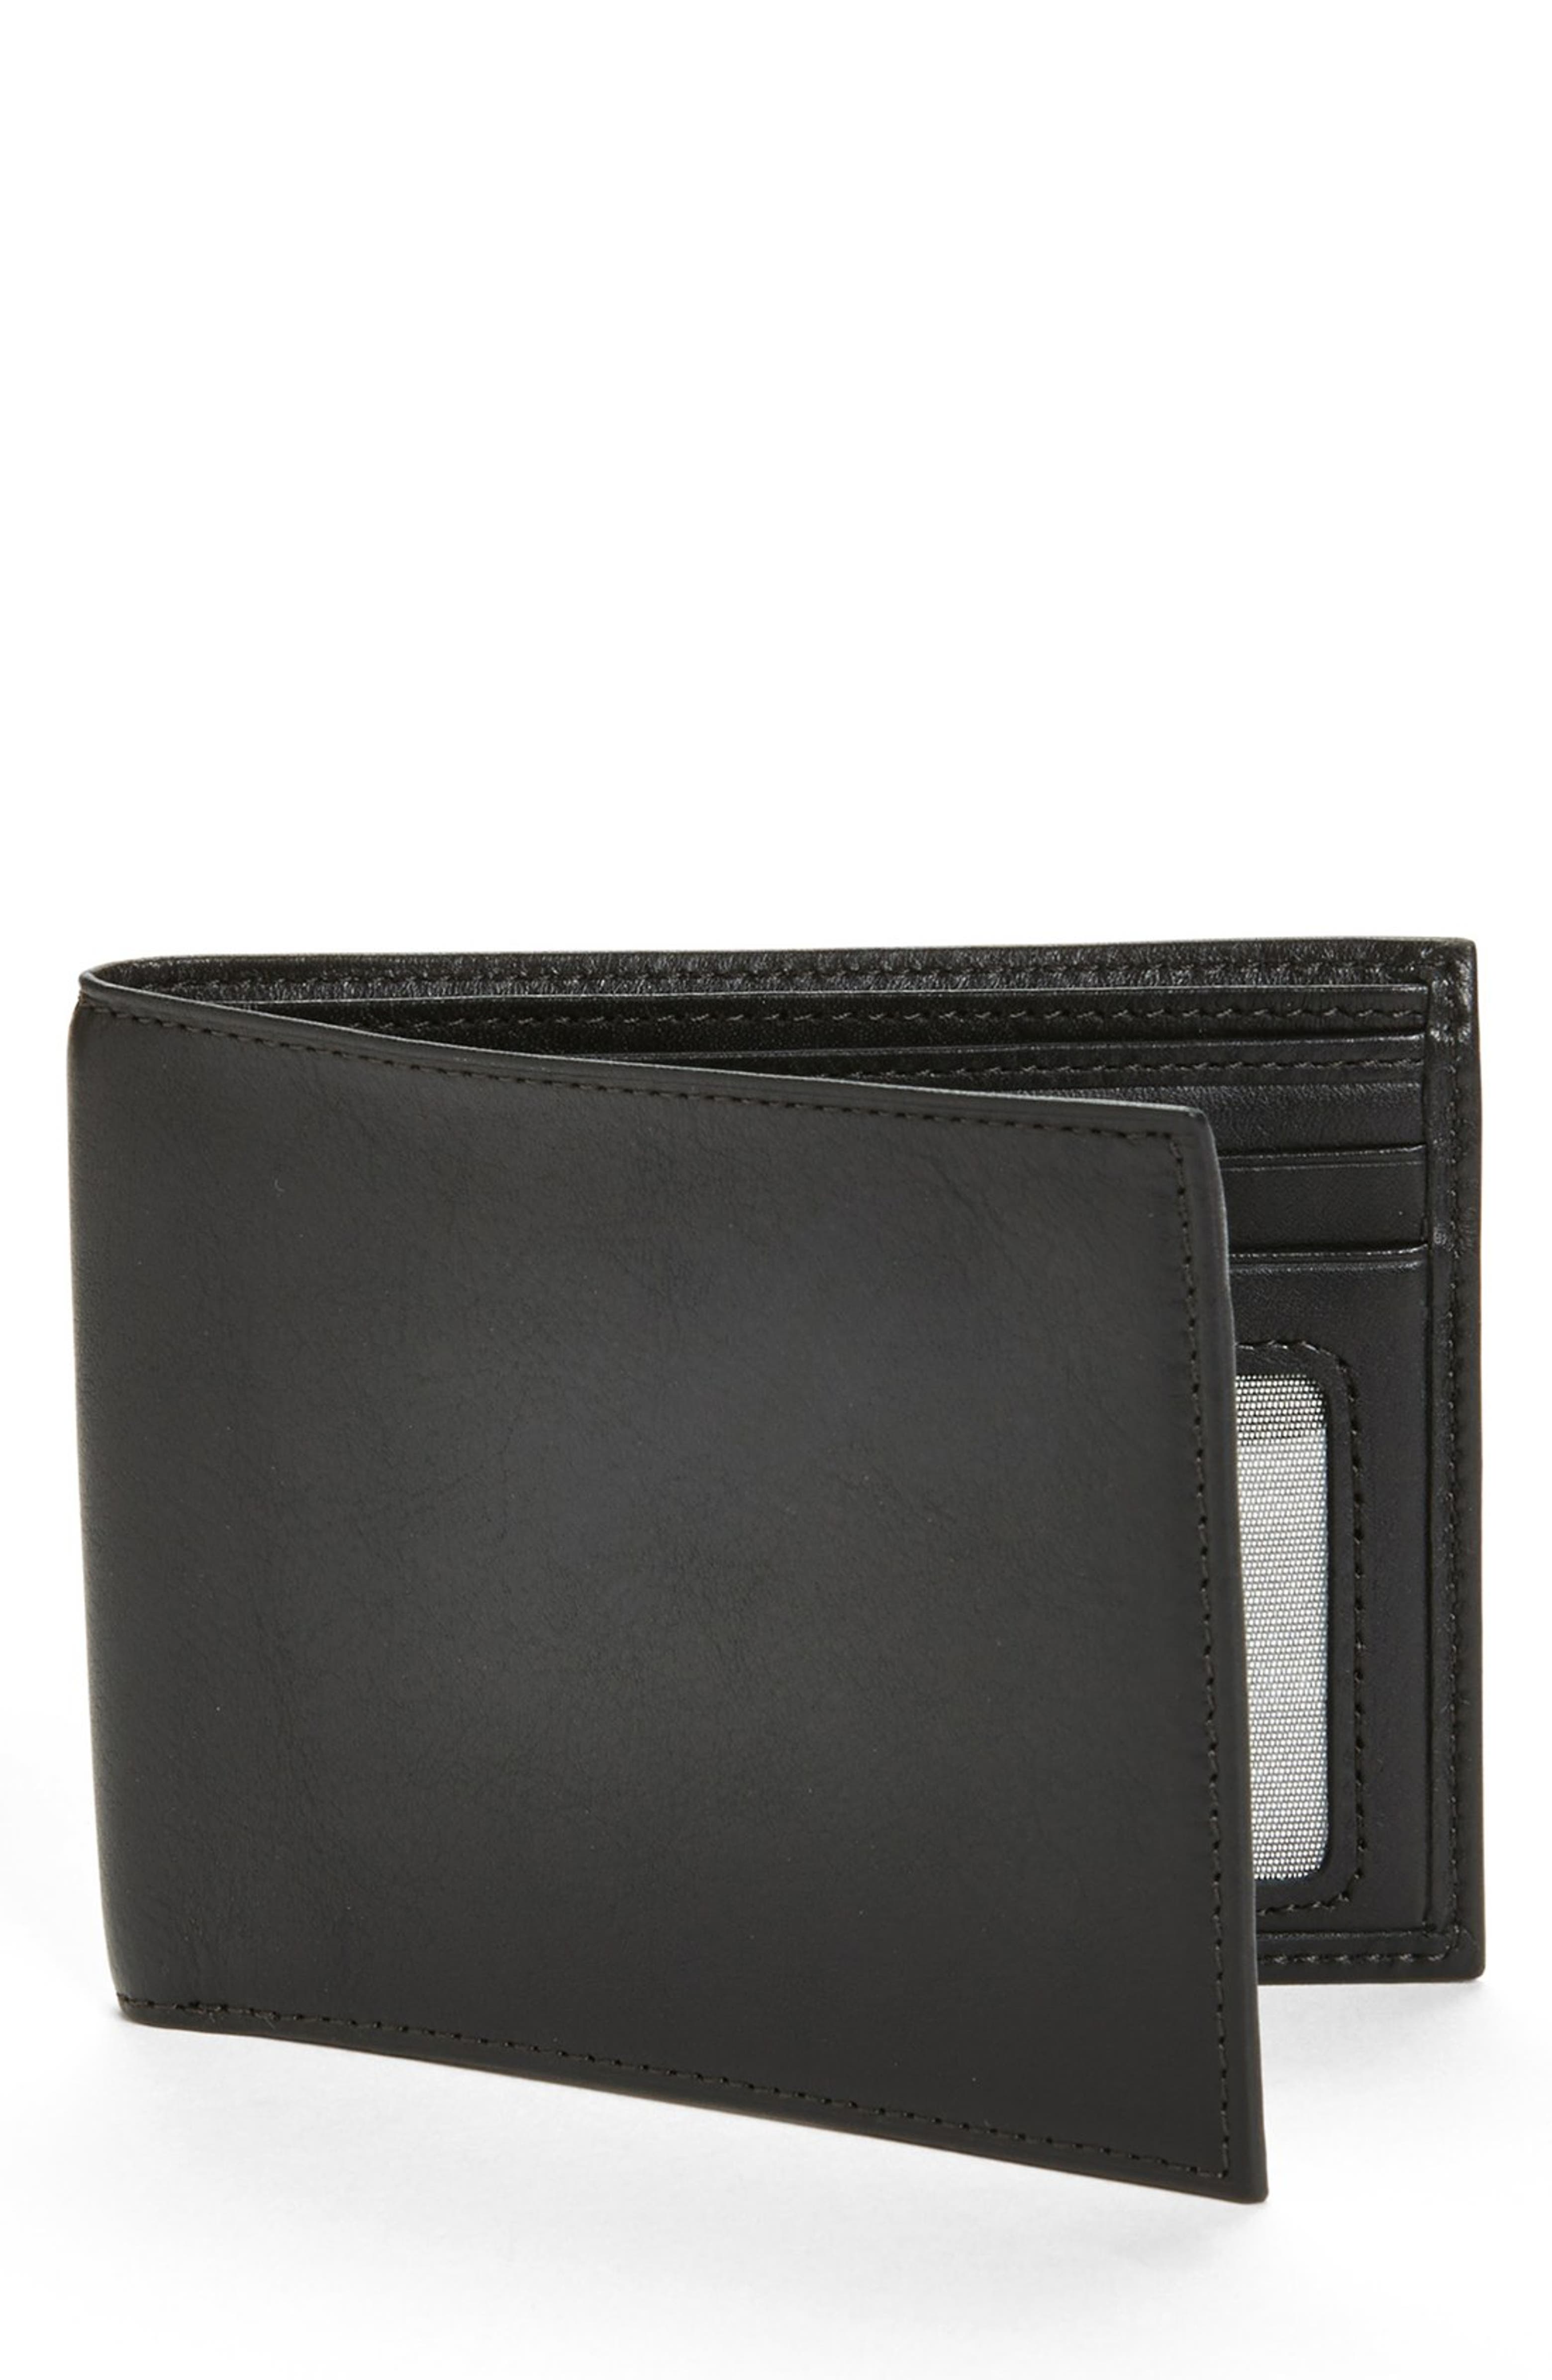 Bosca 'Executive ID' Nappa Leather Wallet | Nordstrom